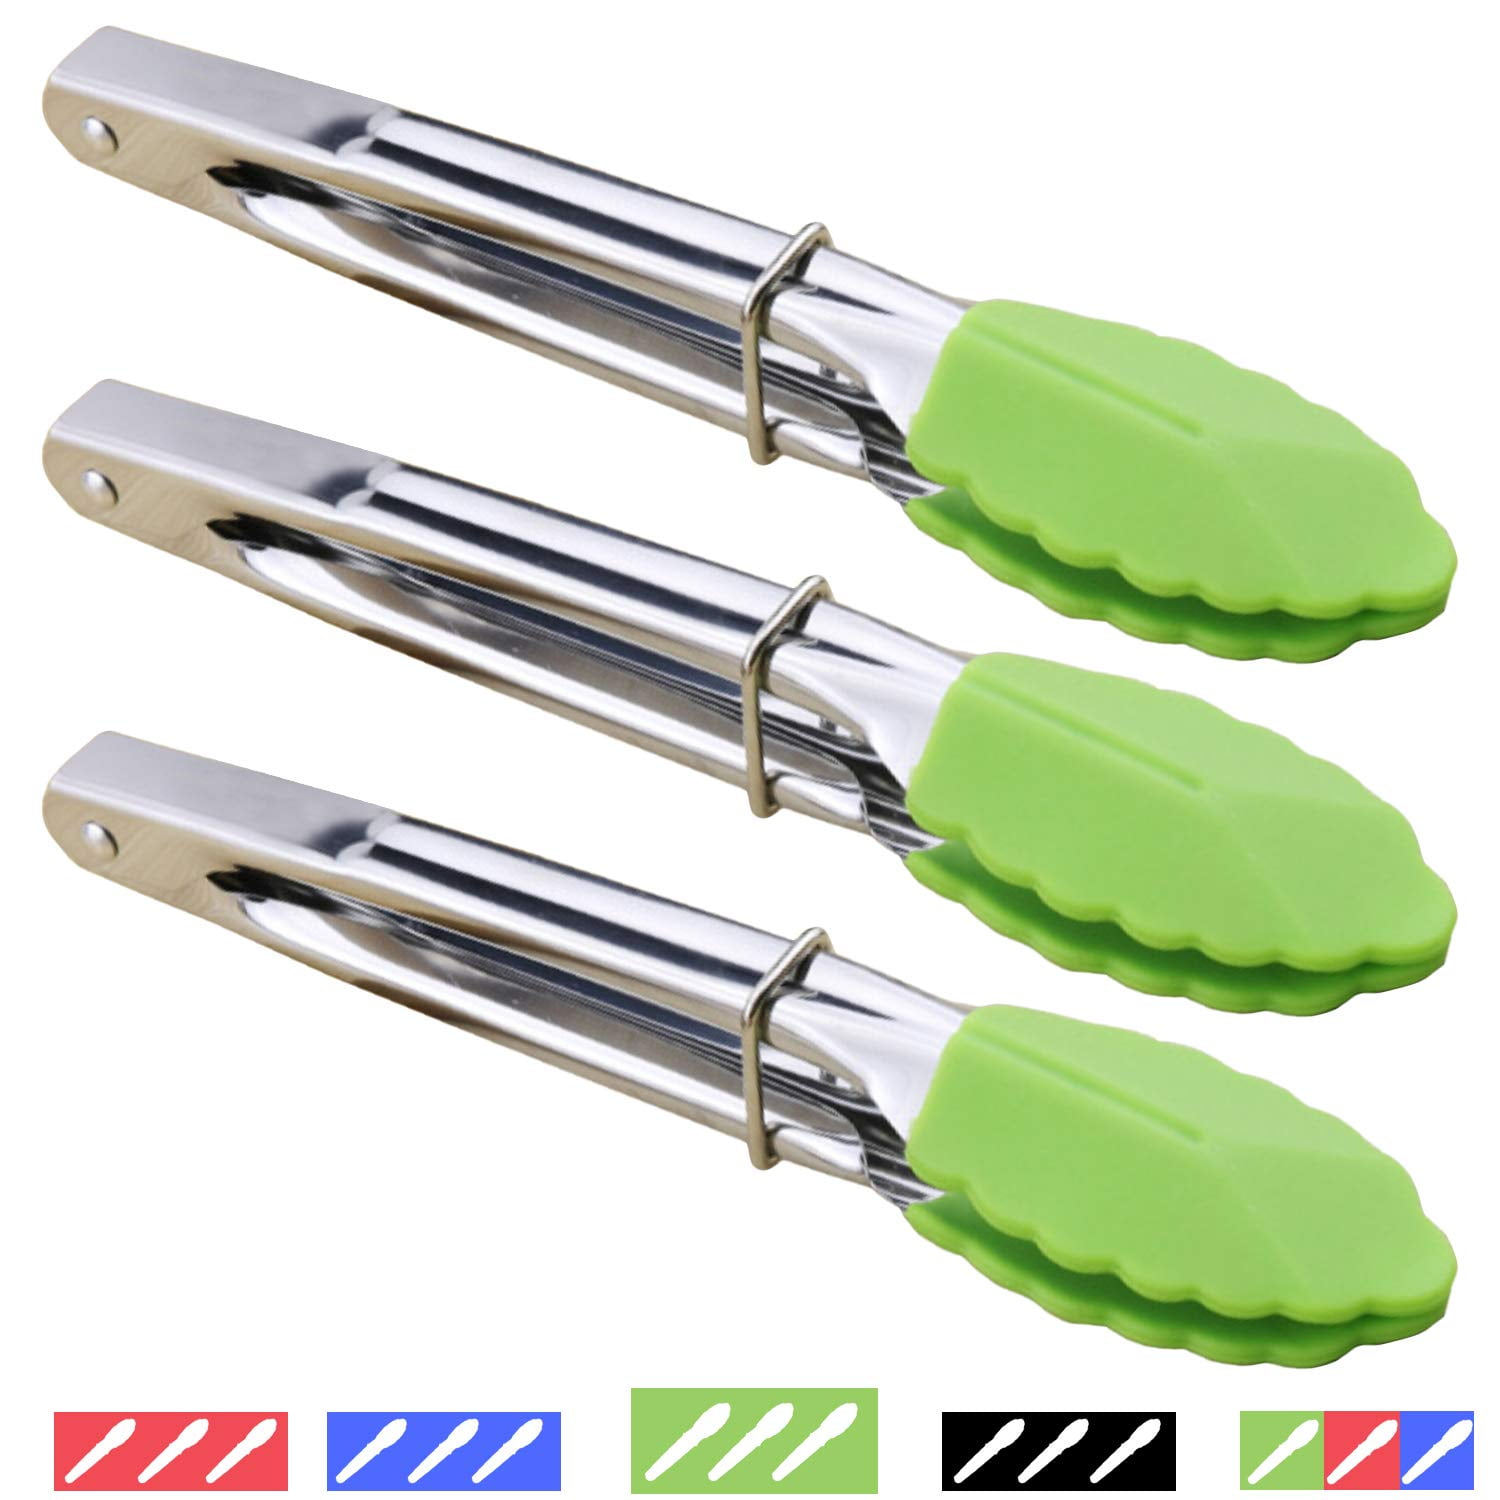 Tongs Small With Silicone Tips Set of 3-7 Inch Mini Food Stainless Steel Tongs 